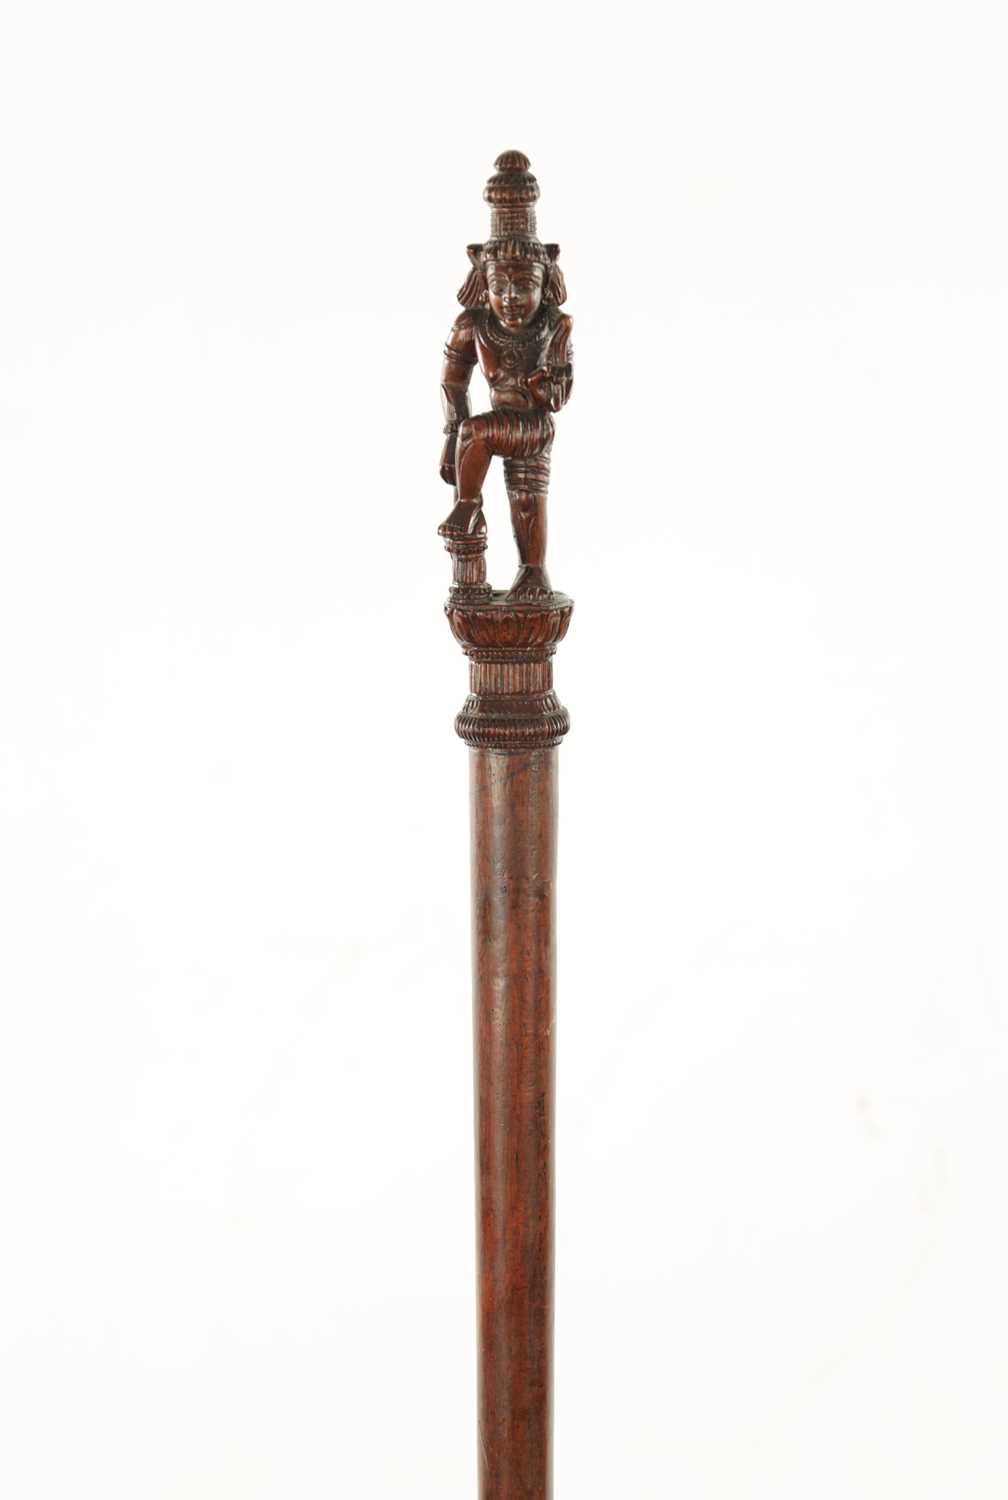 Lot 184 - AN EARLY 20TH CENTURY INDIAN CARVED HARDWOOD CANE WITH CARVED GODESS HANDLE